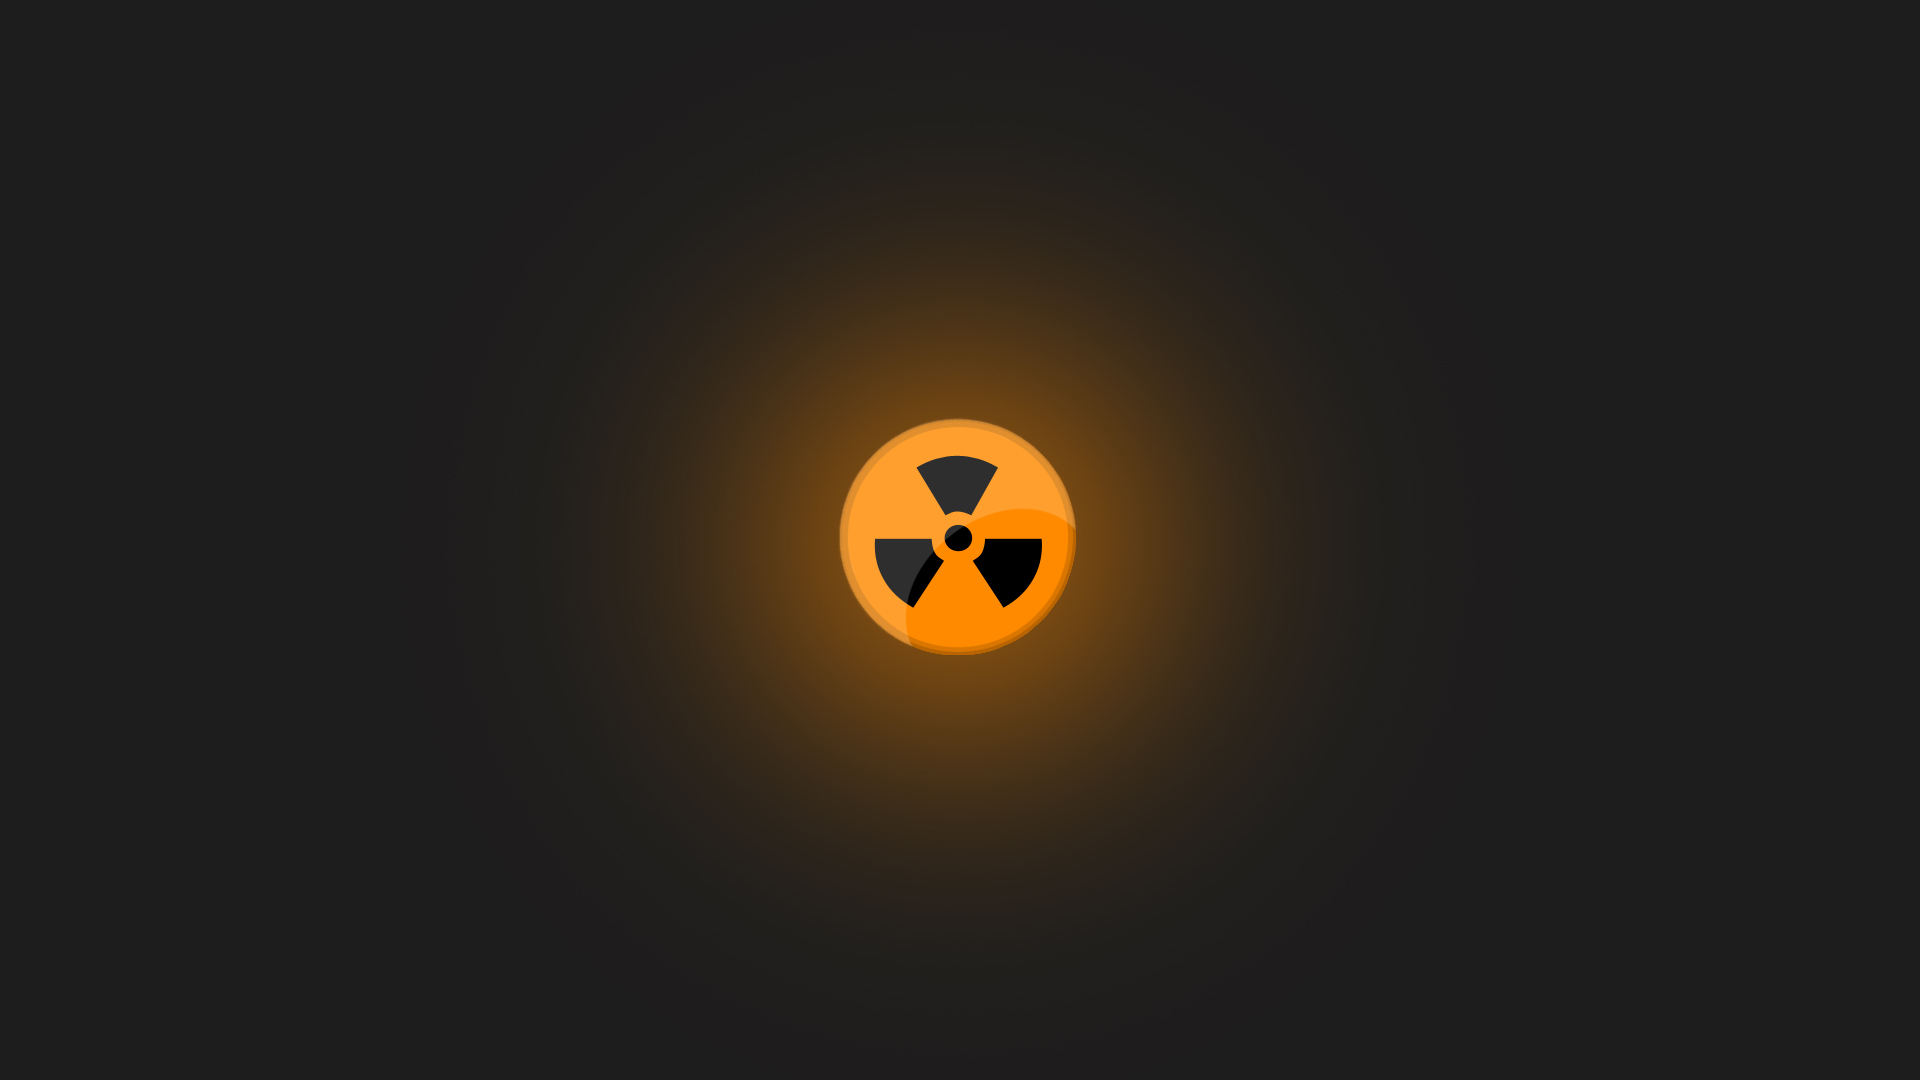 Nuke Wallpaper HD By Qcezwsx